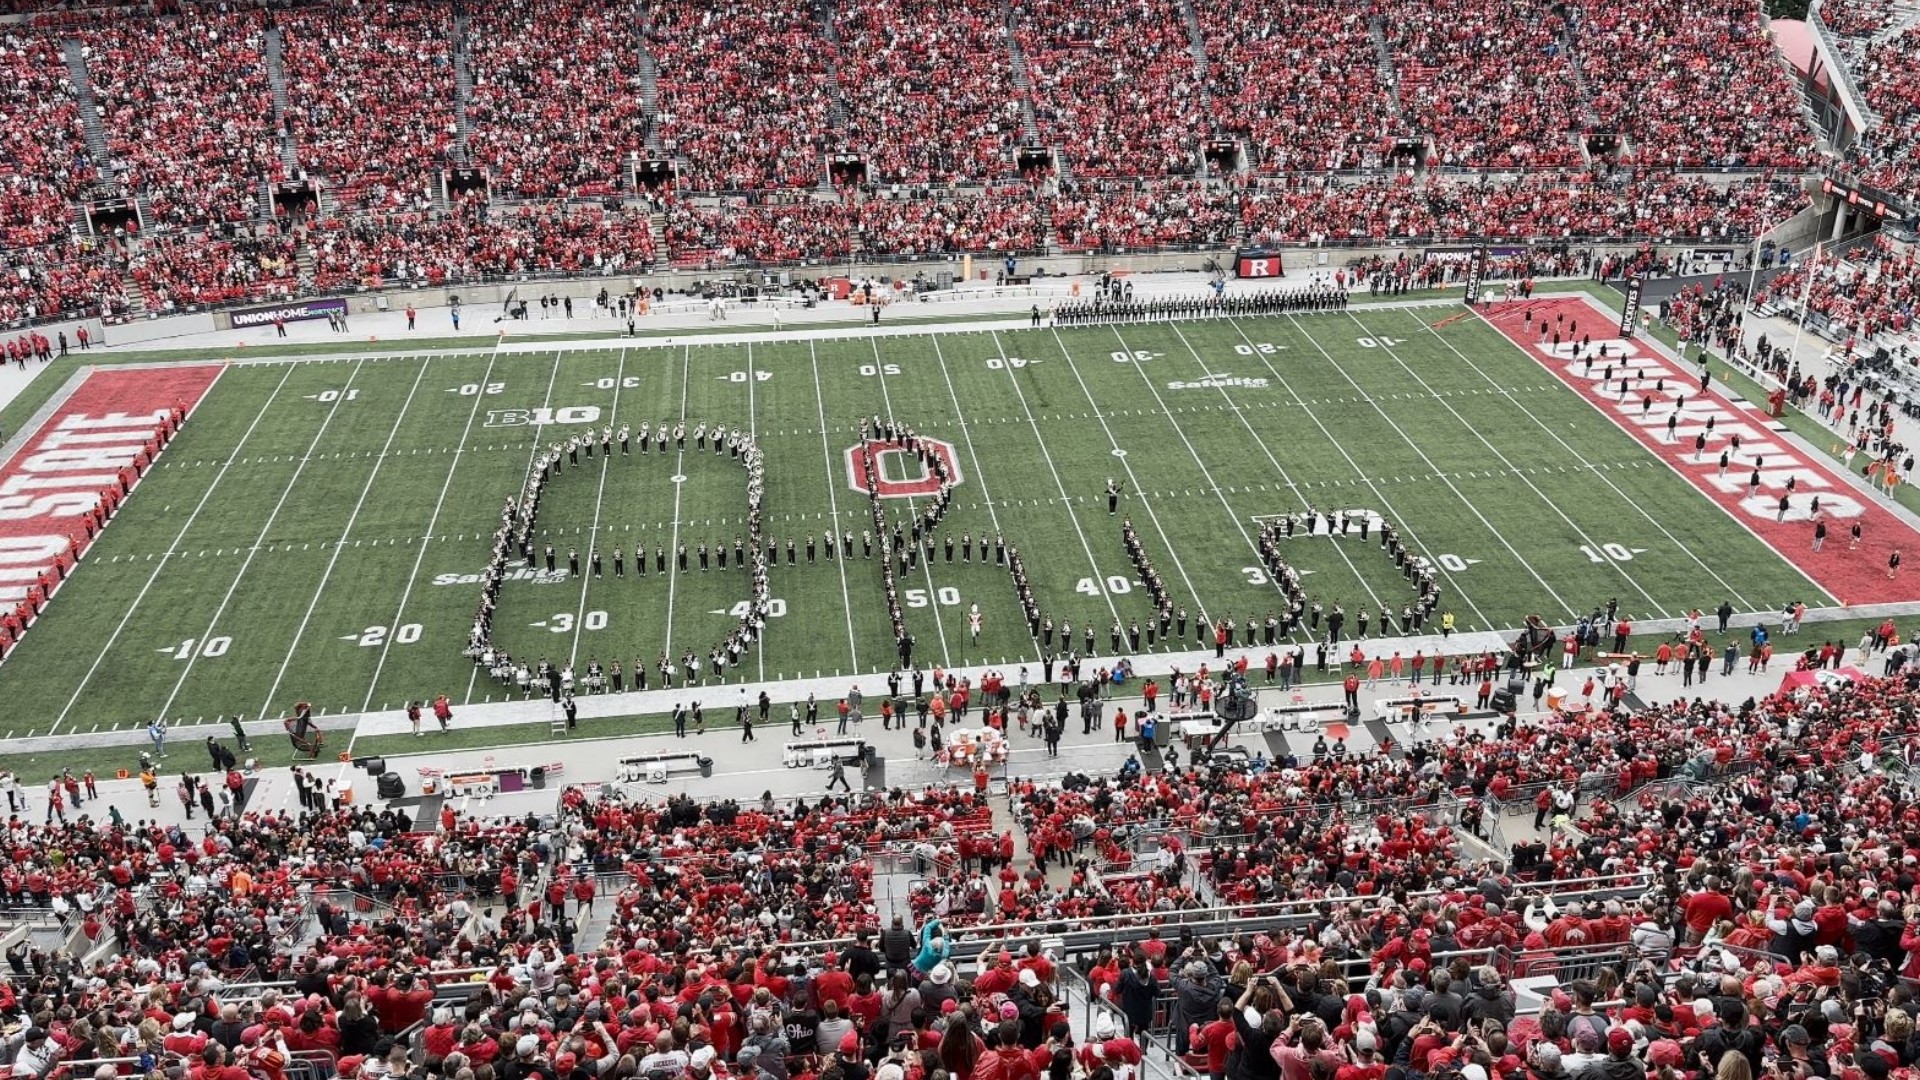 The Best Damn Band In The Land performs "Script Ohio" before the Ohio State-Rutgers game on Saturday, Oct. 1.